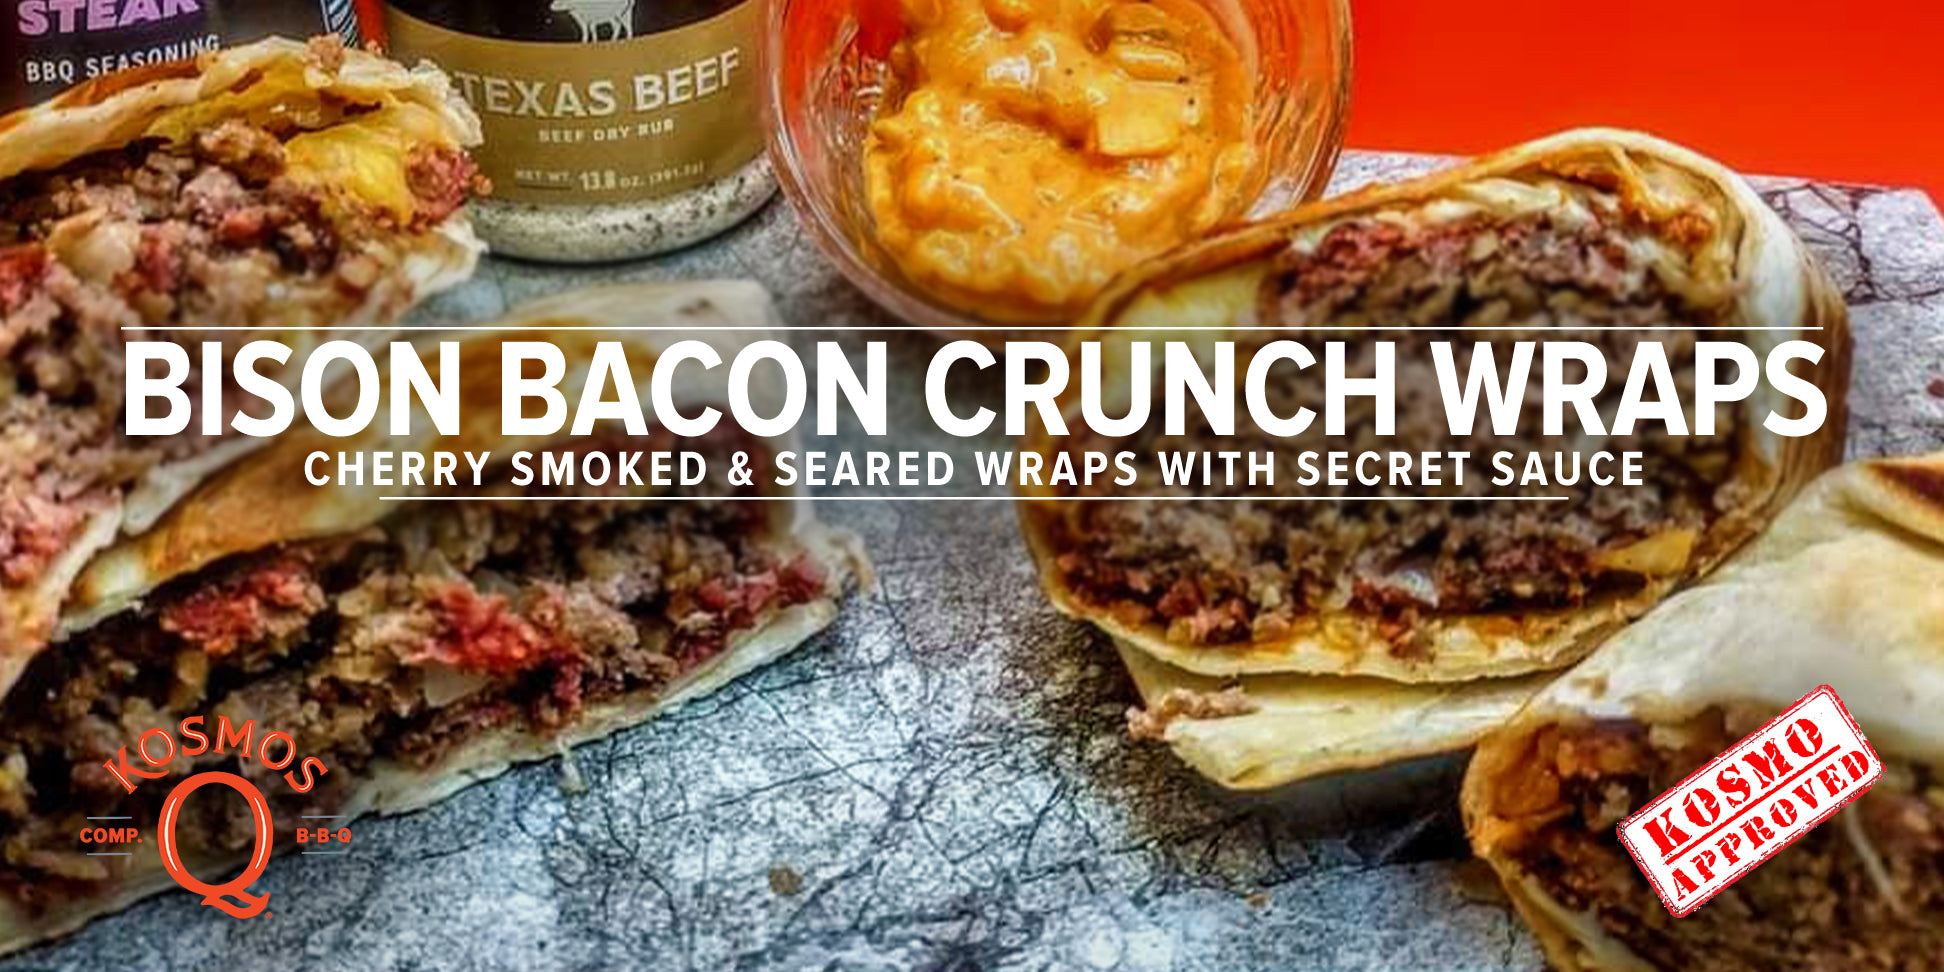 Bison Bacon Crunch Wraps